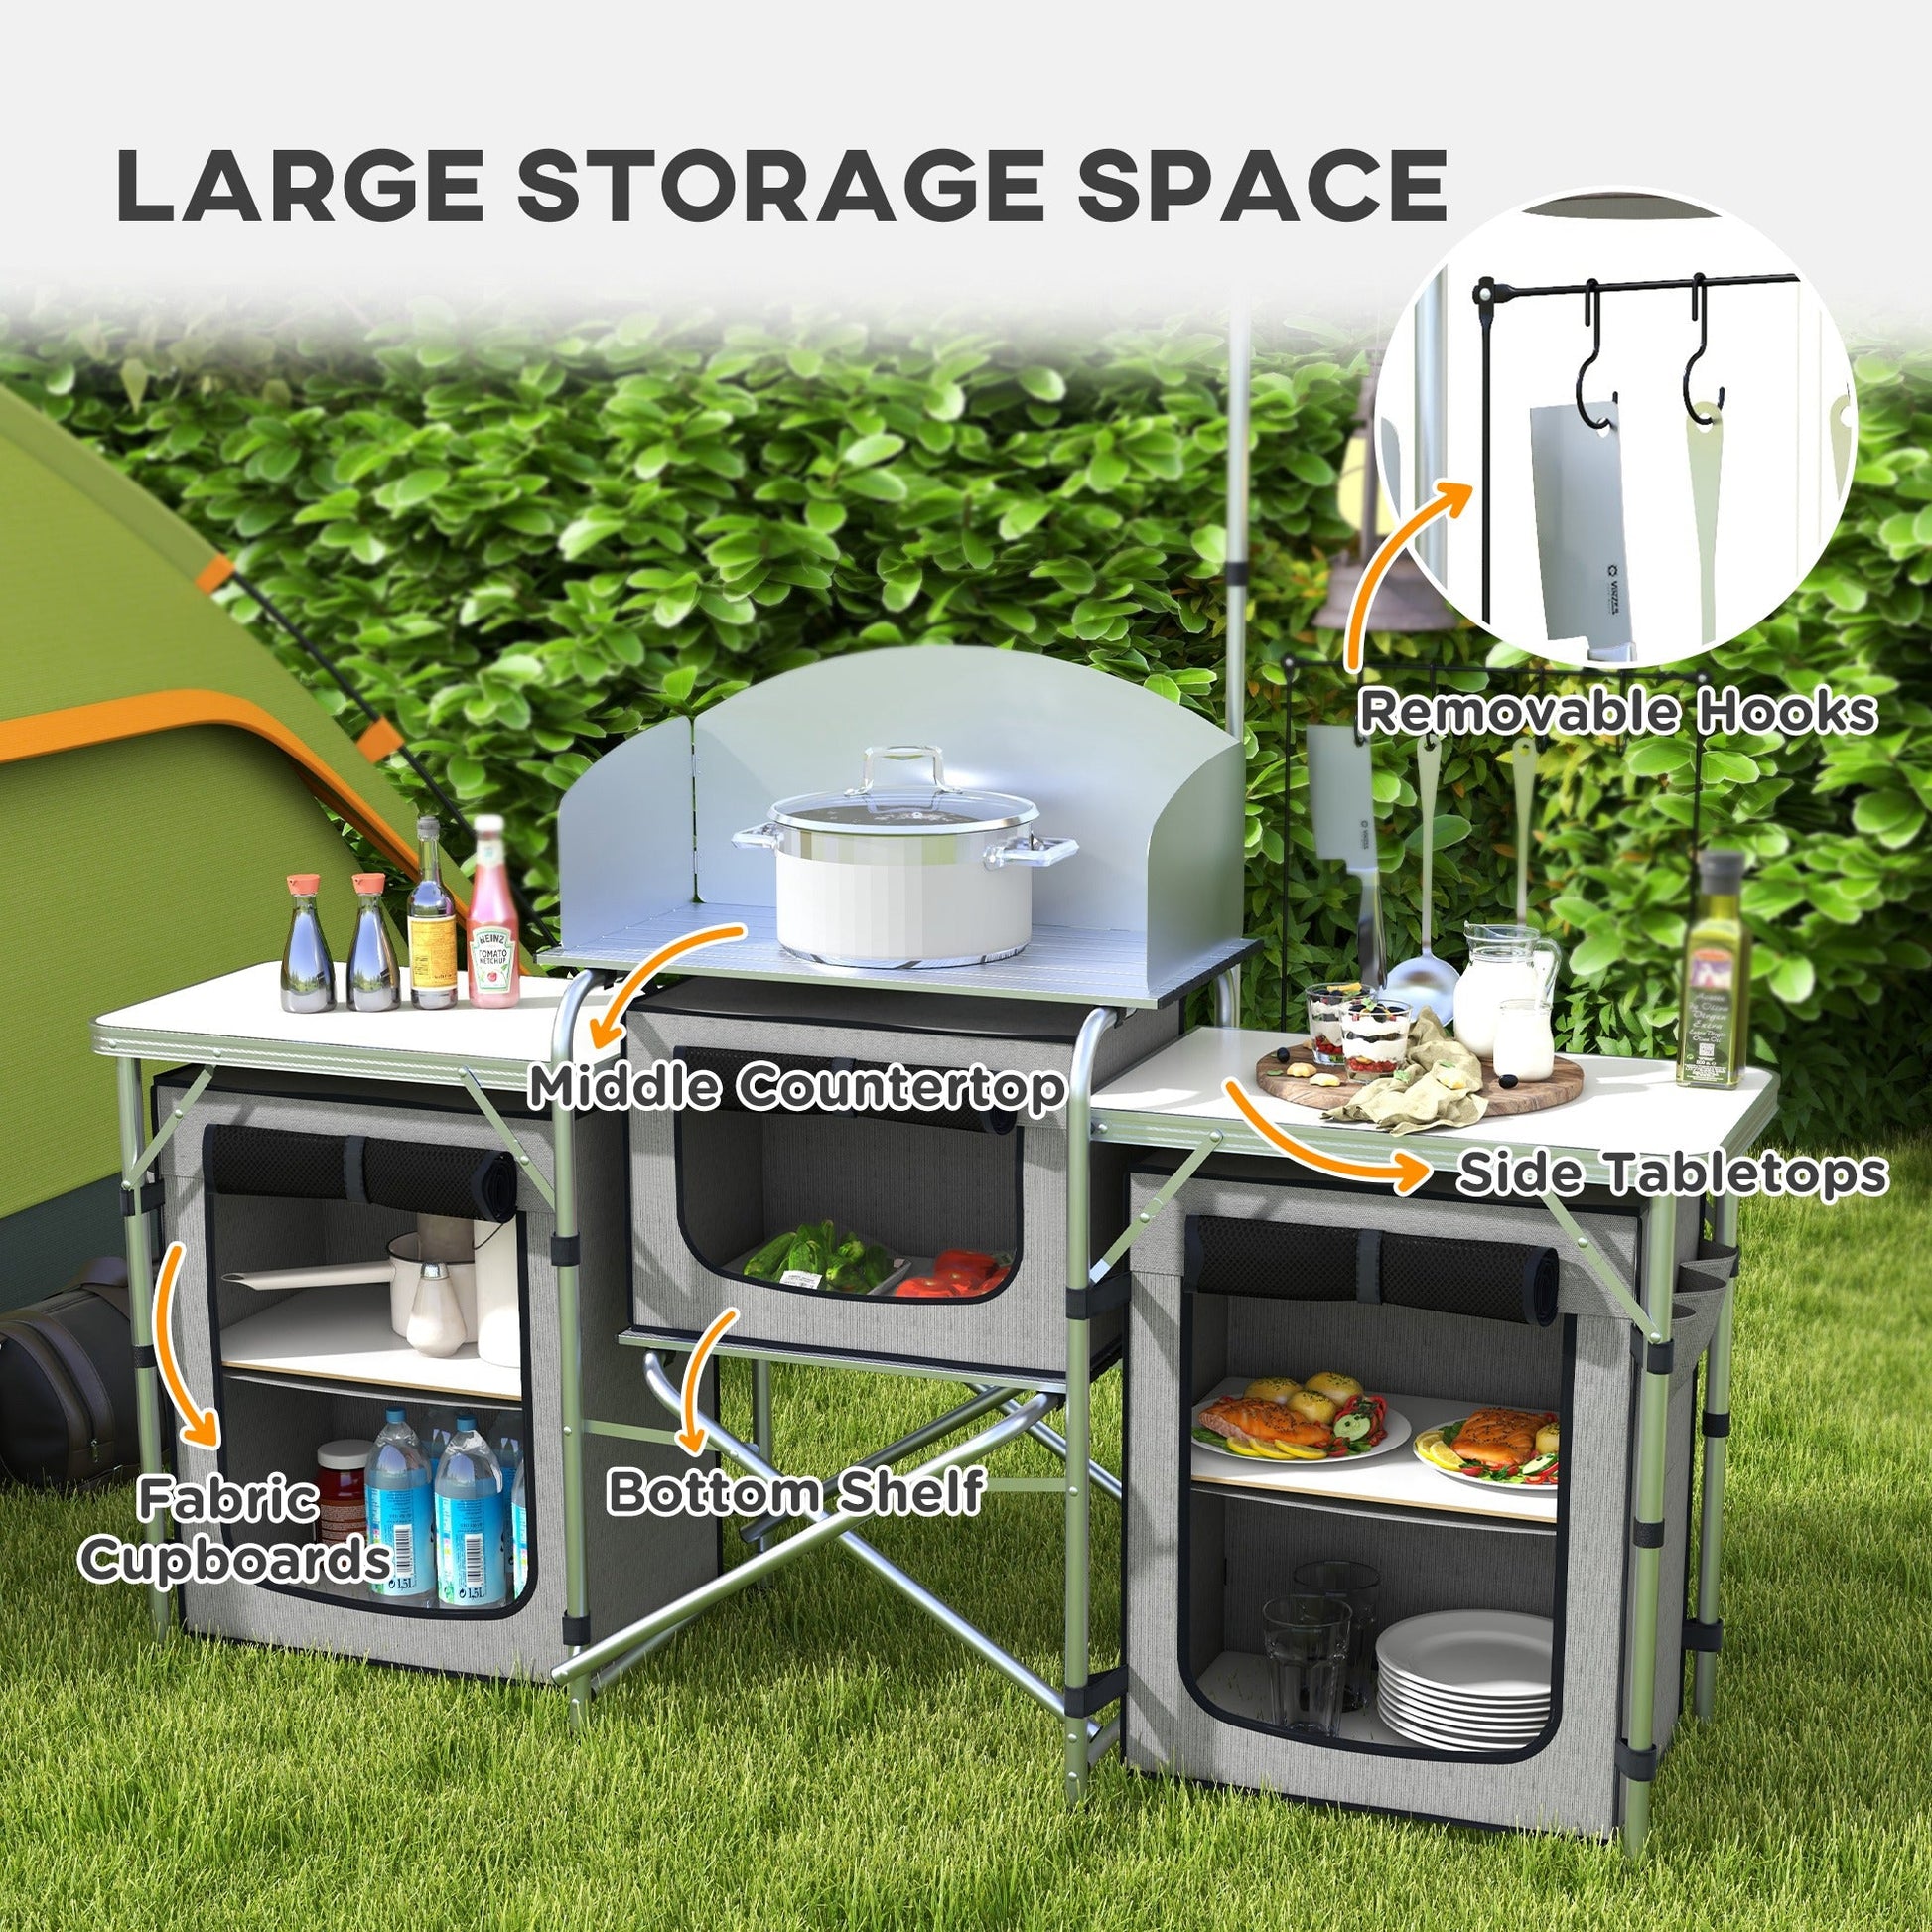 Aluminum Camping Kitchen, Portable Folding Camping Table with Fabric Cupboards, Windshield, Bag for BBQ, Picnic, Grey at Gallery Canada